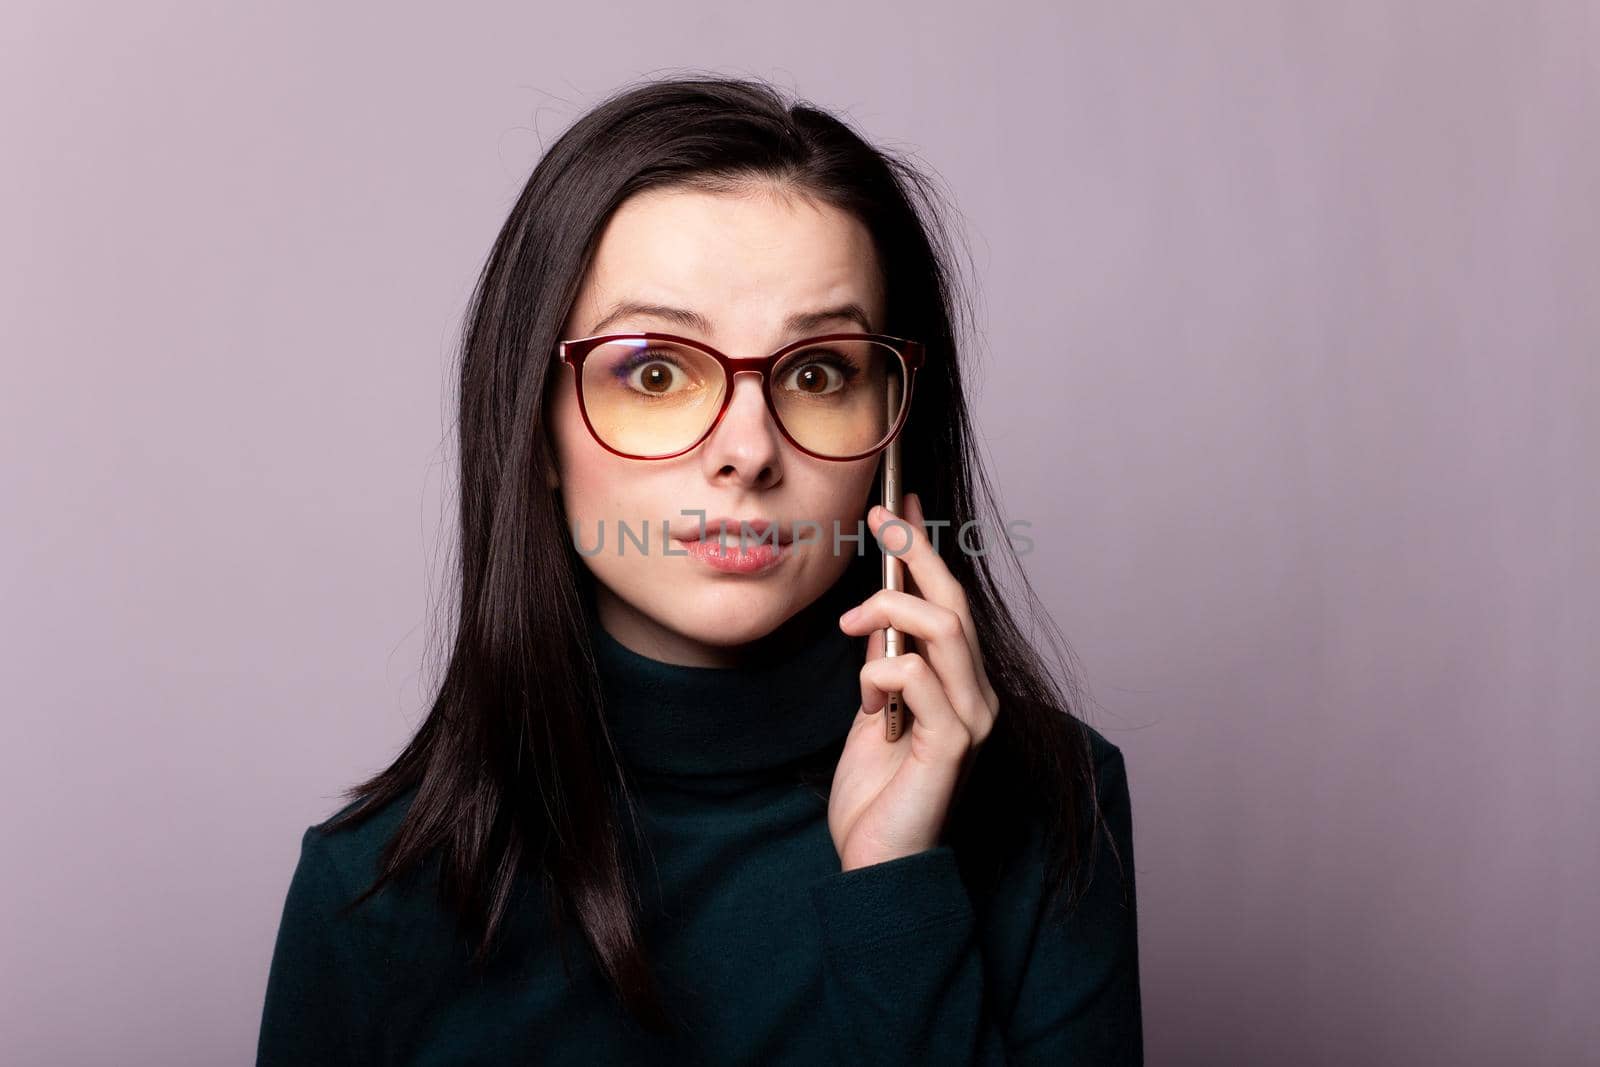 woman in a green turtleneck and glasses for sight communicates on the phone, portrait on a gray background. High quality photo